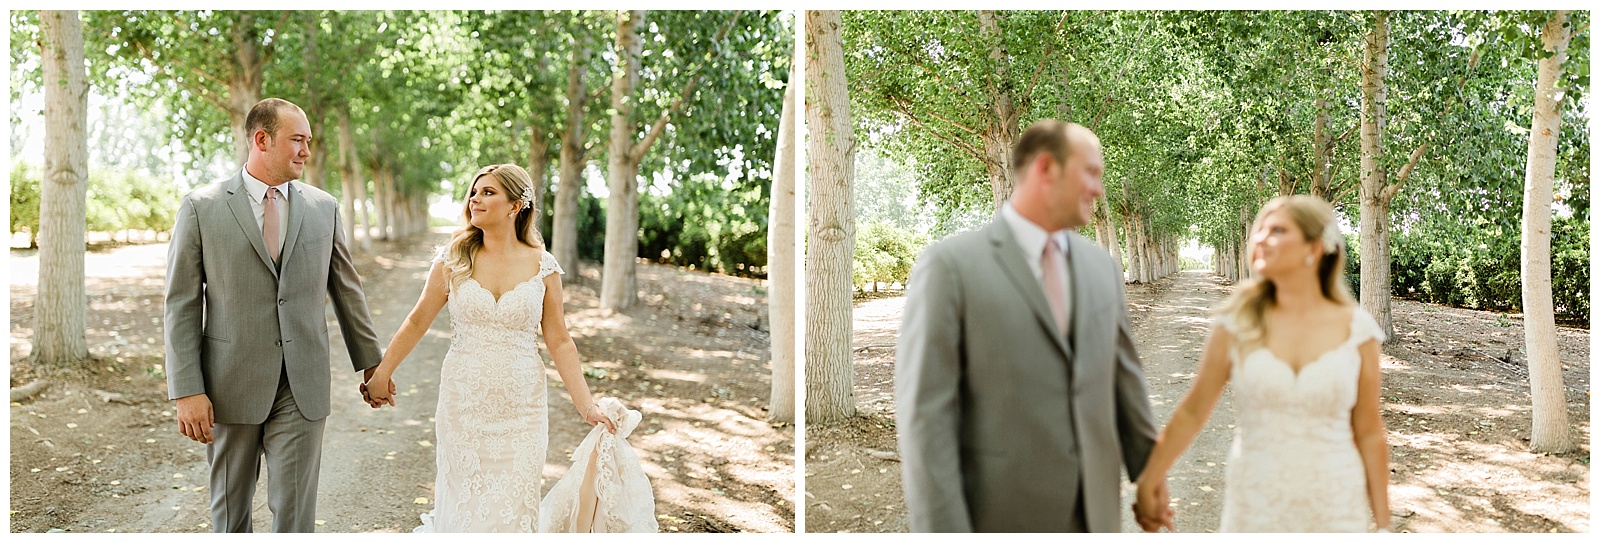 bride and groom holding hands and walking together down tree lane at seven sycamores ranch in ivanhoe california